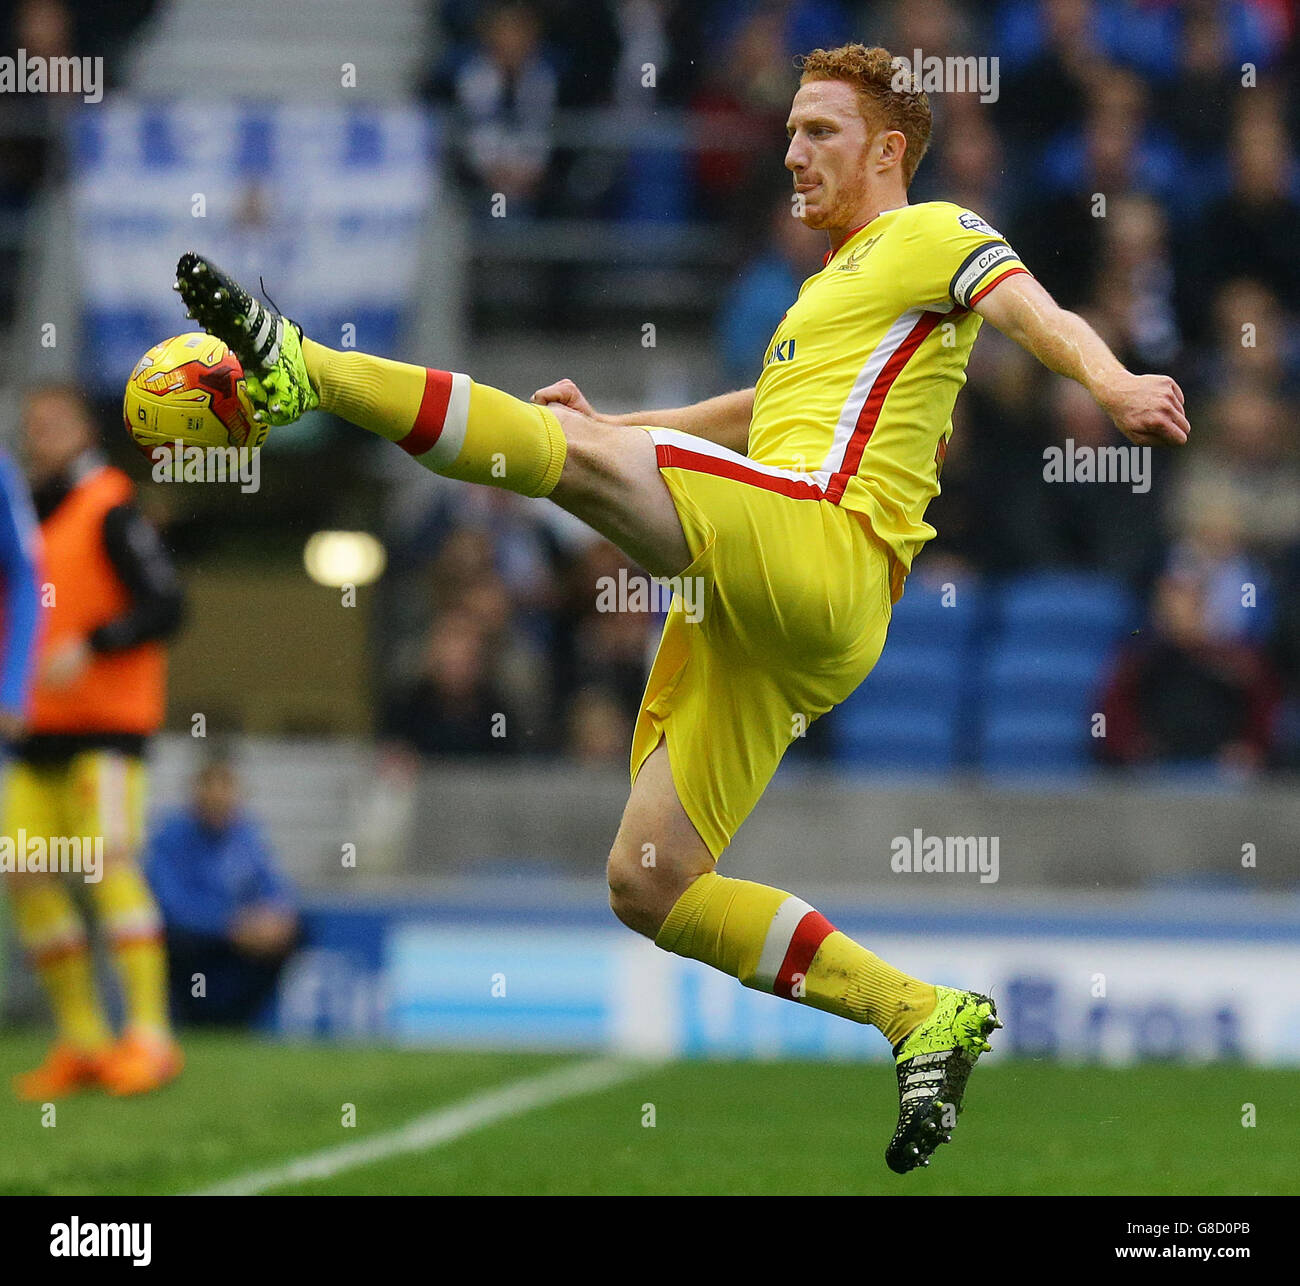 Milton Keynes Dons' Dean Lewington in action during the Sky Bet Championship match at the Amex Stadium, Brighton. PRESS ASSOCIATION Photo. Picture date: Saturday November 7, 2015. See PA story SOCCER Brighton. Photo credit should read: Gareth Fuller/PA Wire. Stock Photo